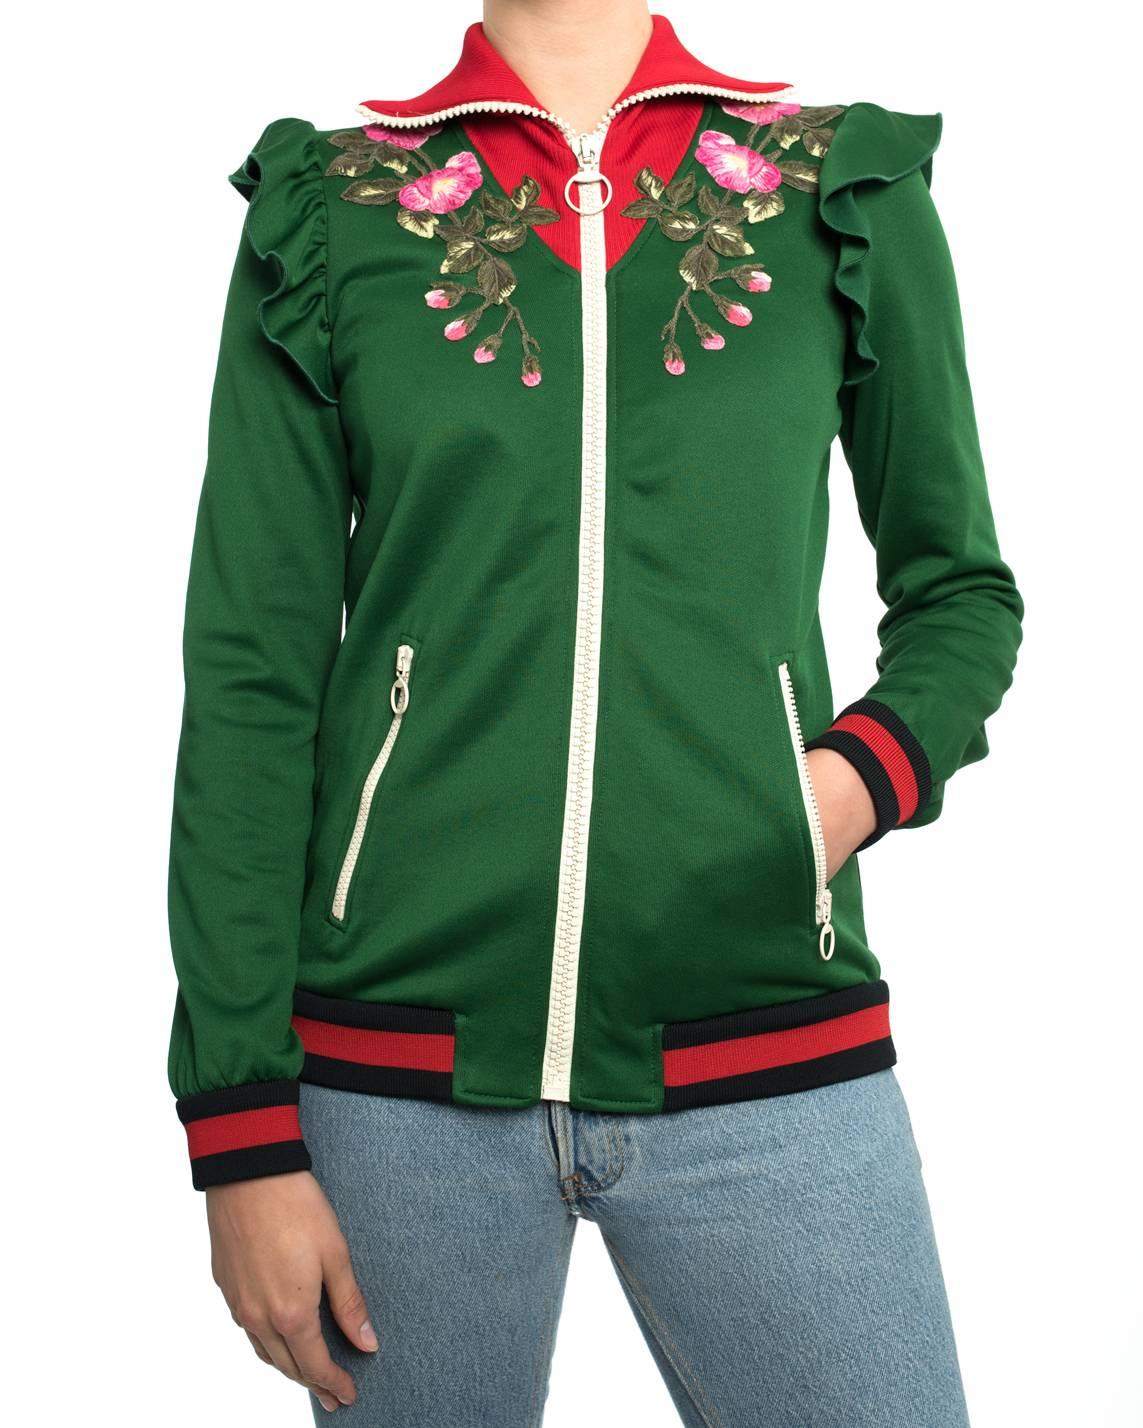 Gucci Green Zip Front “Hollywood” Tiger Track Jacket.  Designed by Alessandro Michele for the Pre-fall 2017 runway collection and ad campaign.  White zippers, navy and red striped hem and cuffs, floral embroidered patches. Marked size S.  Garment